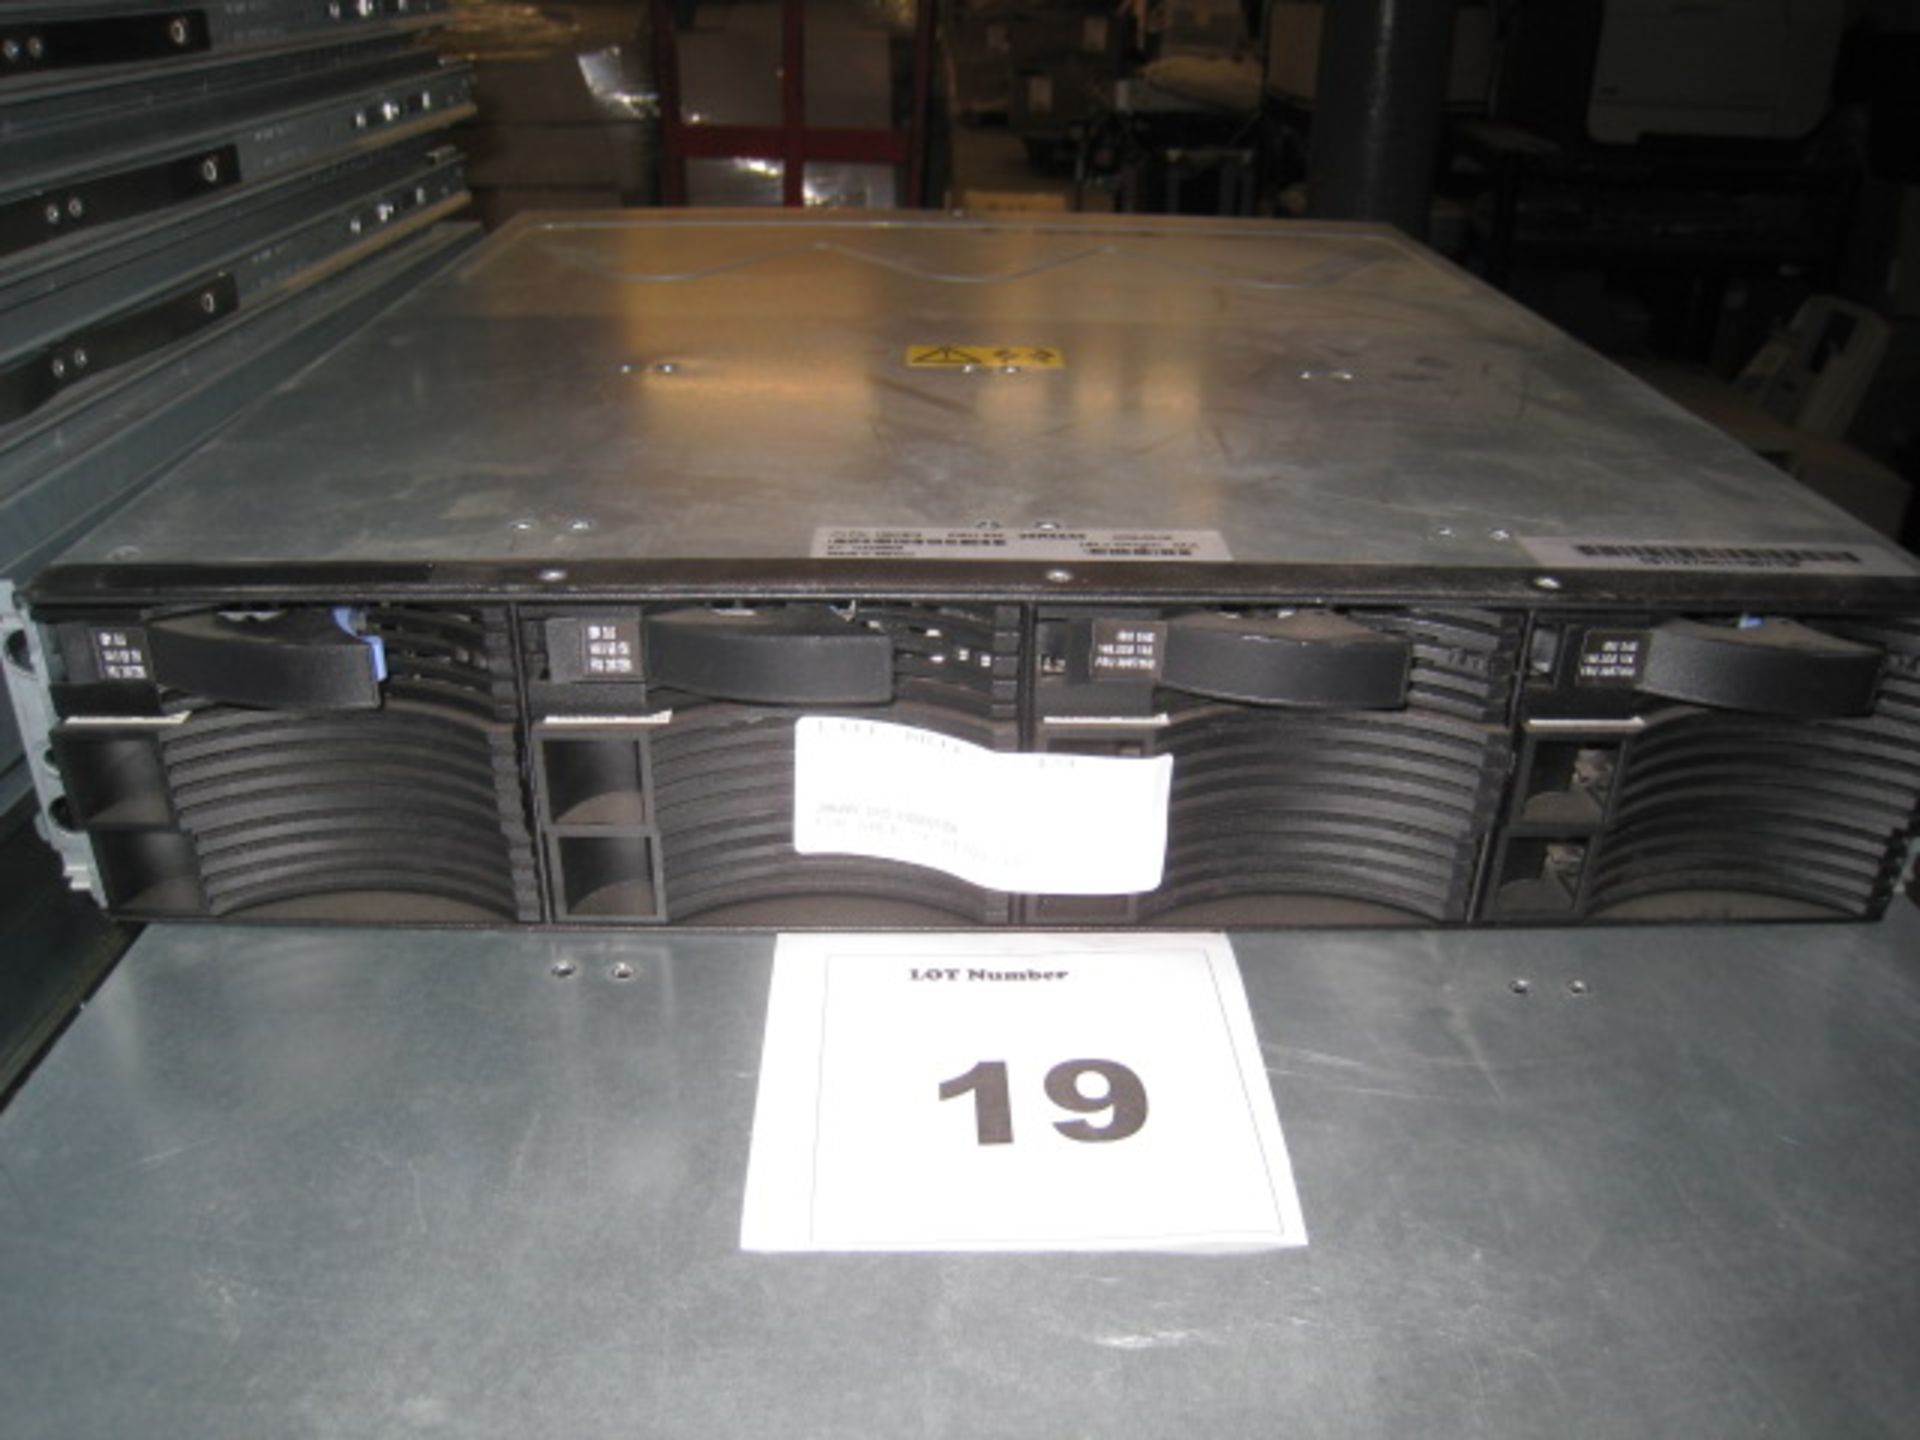 IBM HARD DRIVE ARRAY FRU P/N 39R6545 containing 4 x 146Gb SAS HDD's. (Capable of holding 12 drives)